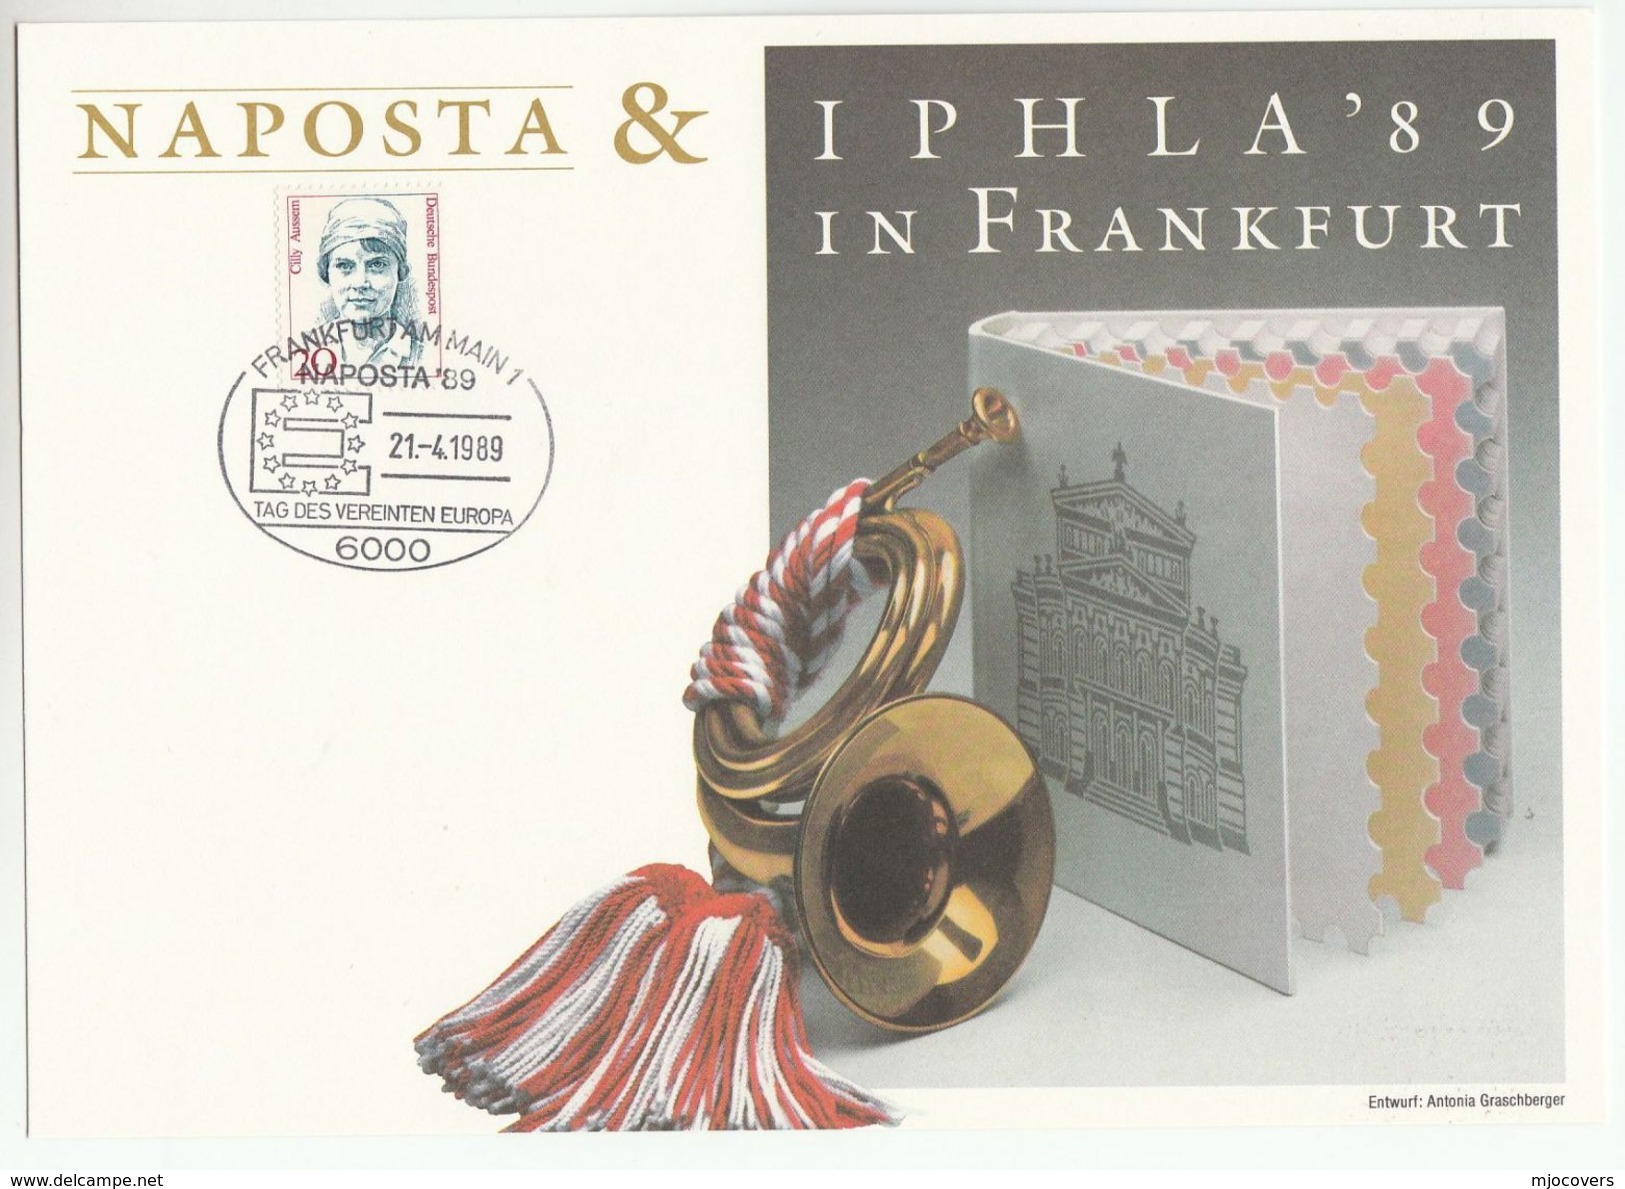 1989 NAPOSTA 'UNITED EUROPE' DAY  EVENT COVER Card GERMANY Philatelic Exhibition, European Community Stamps - EU-Organe